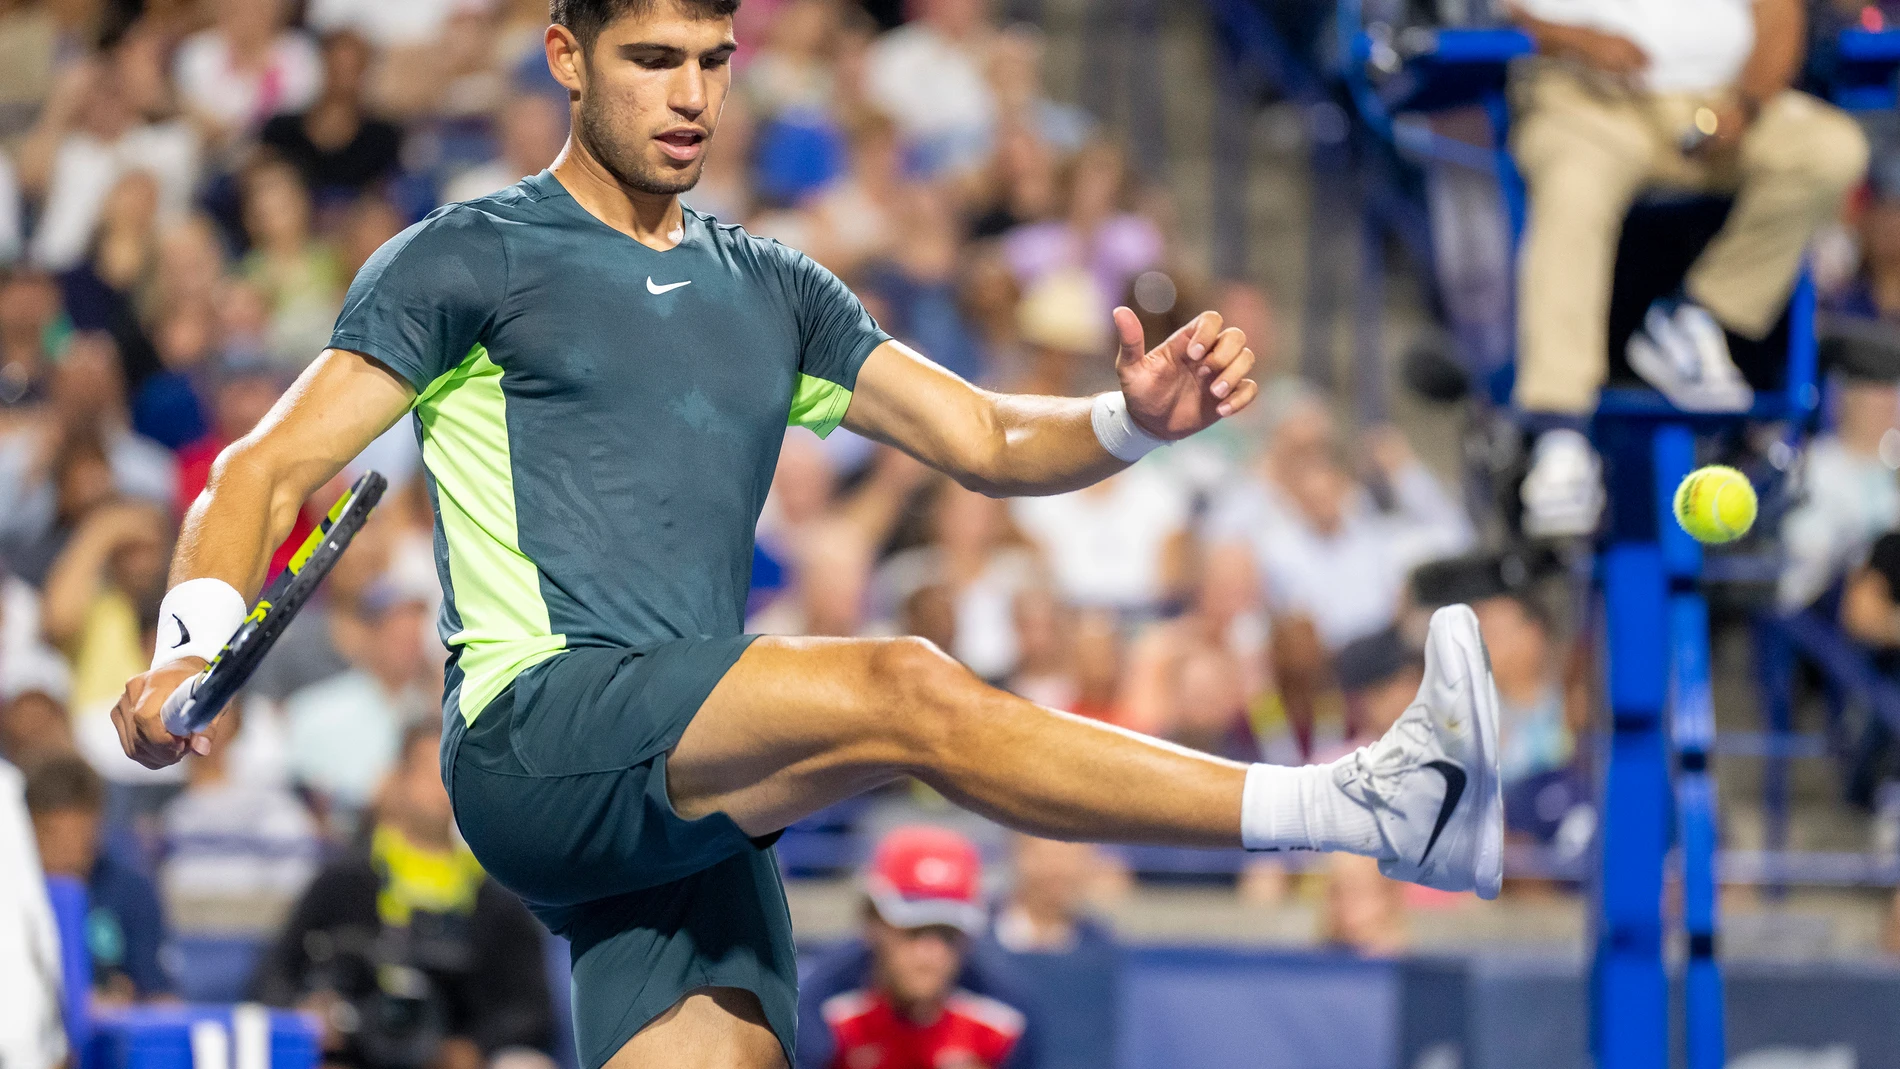 Carlos Alcaraz, of Spain, kicks the ball after hitting a volley into the net during his loss to Tommy Paul, of the United States, at the National Bank Open men’s tennis tournament Friday, Aug. 11, 2023, in Toronto. (Frank Gunn/The Canadian Press via AP)